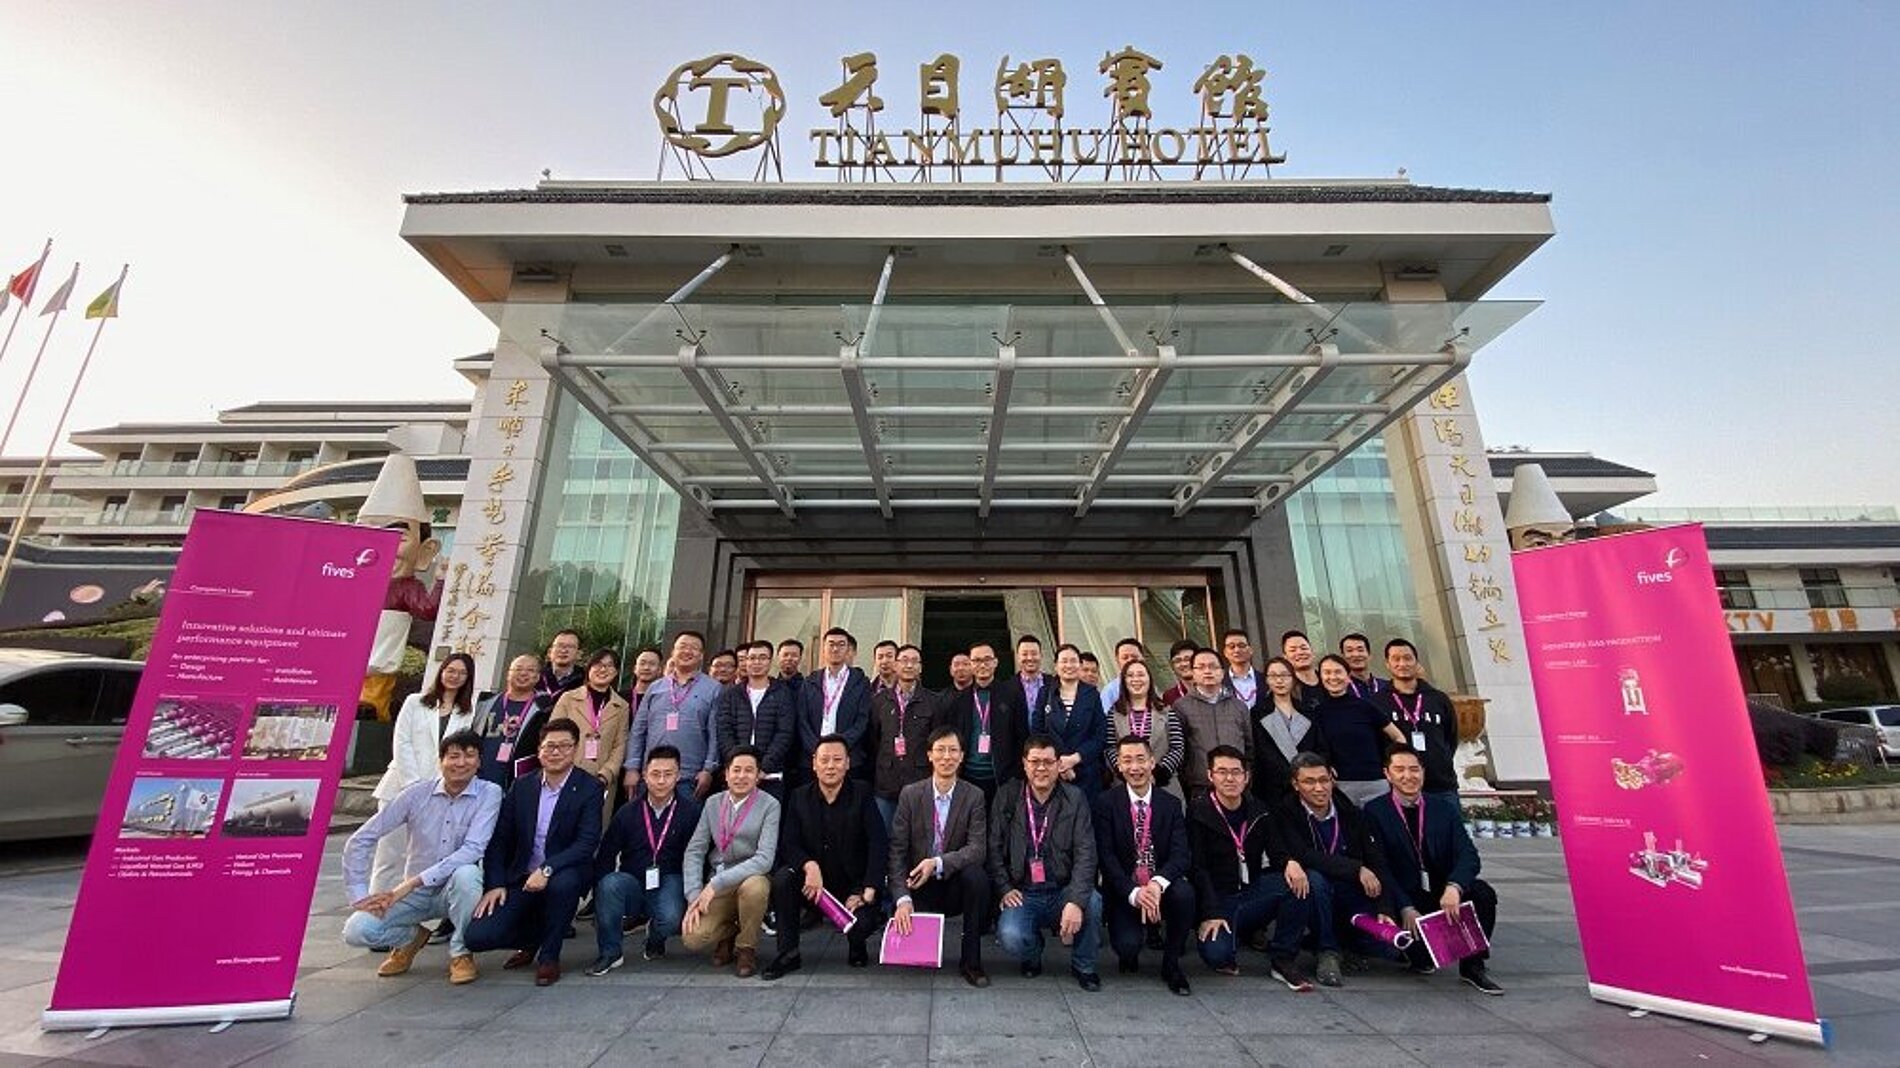 Fives held a customer day event in Changzhou